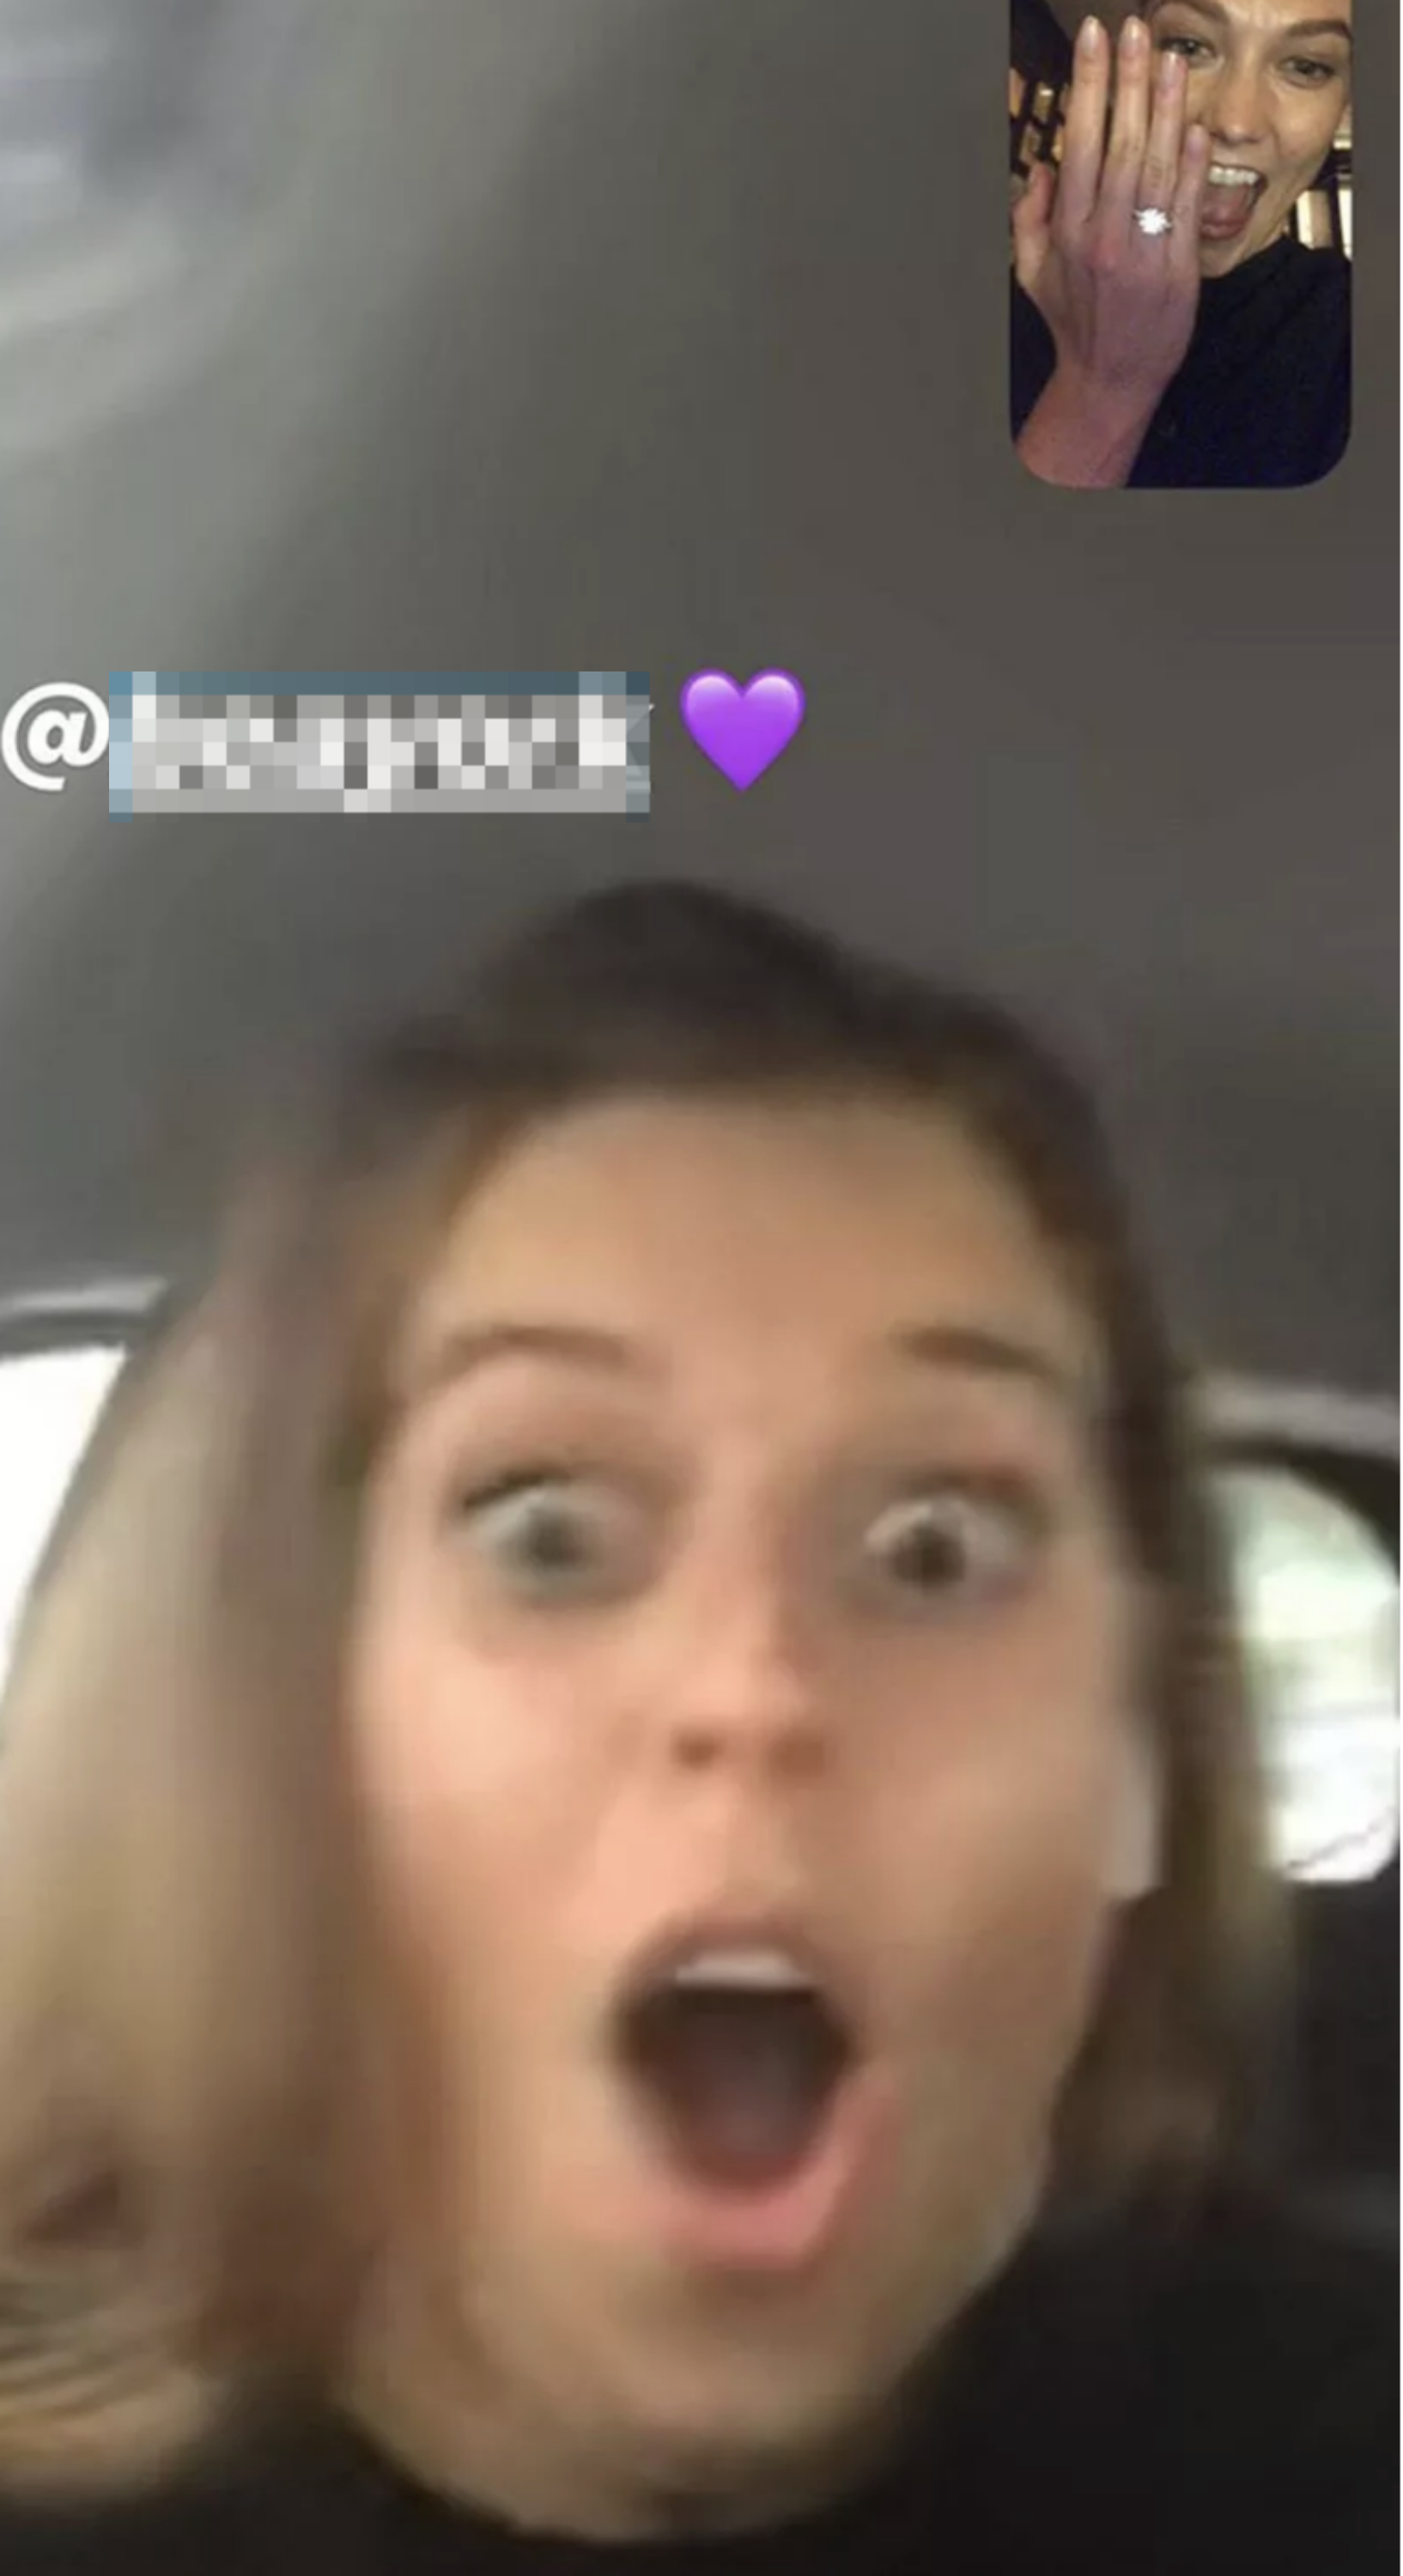 A surprised Karlie with hand partially covering mouth, a ring visible, in a blurry screenshot of shocked Beatrice on FaceTime